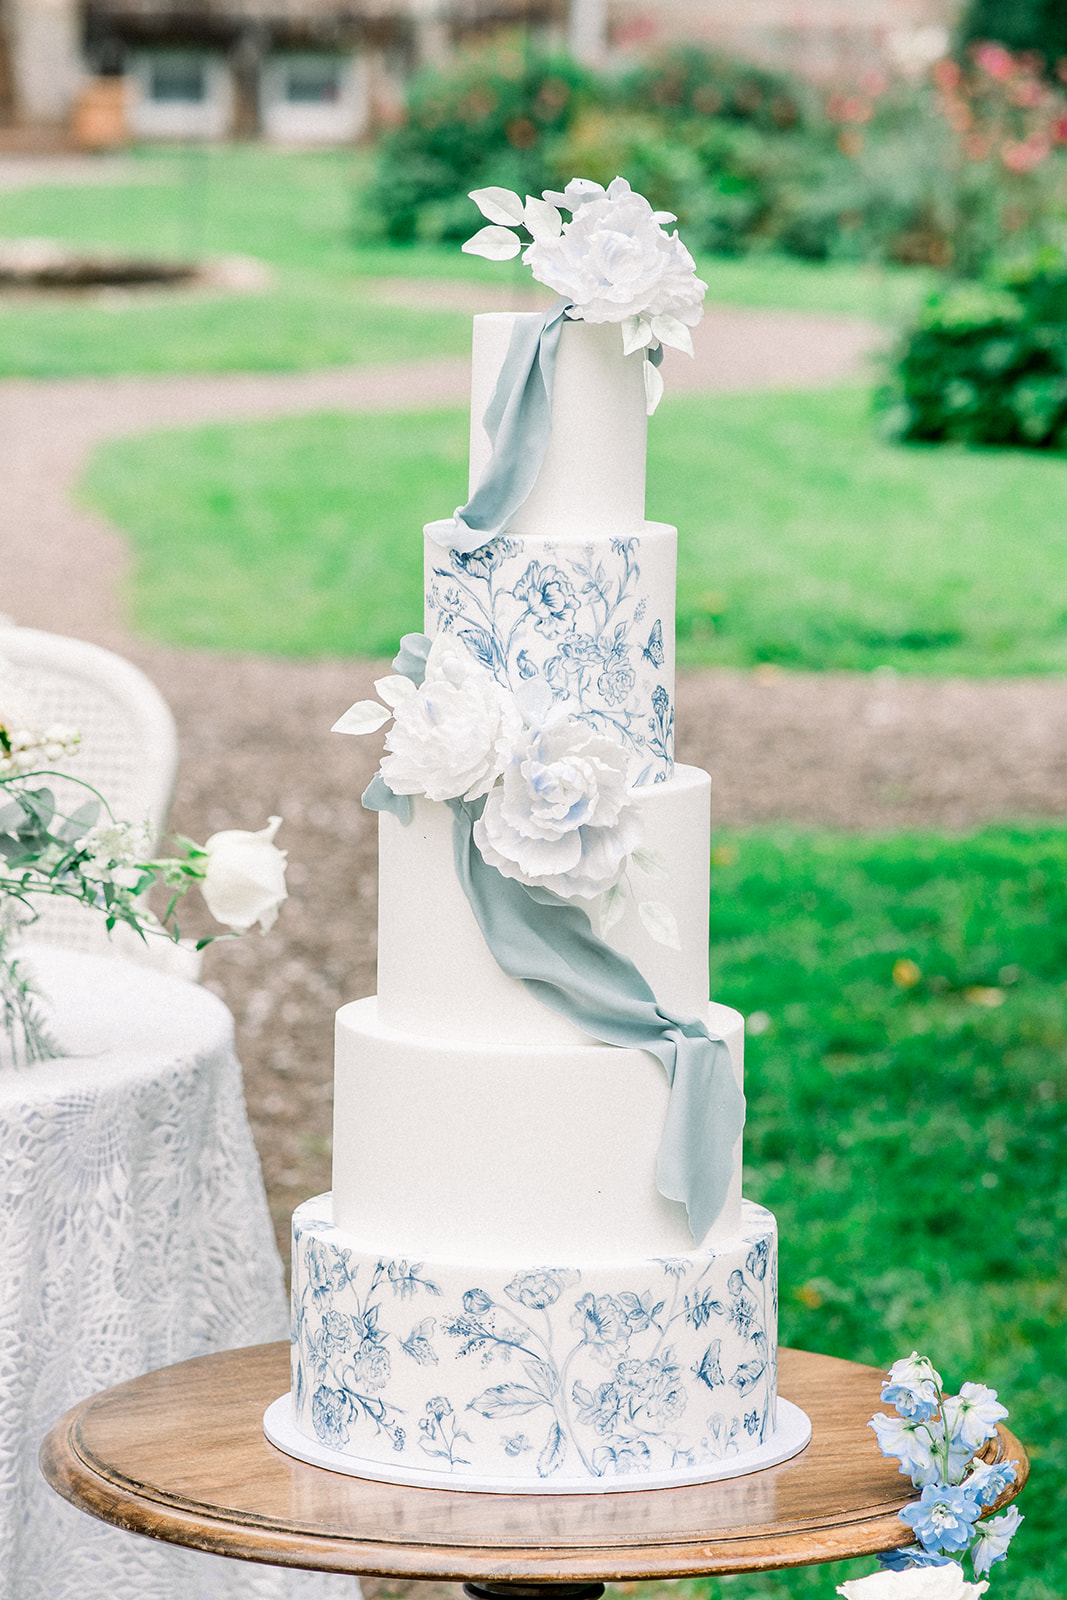 Artisan wedding cake by Erzulie featuring lace details, at an Ireland destination wedding within the storied walls of Ca